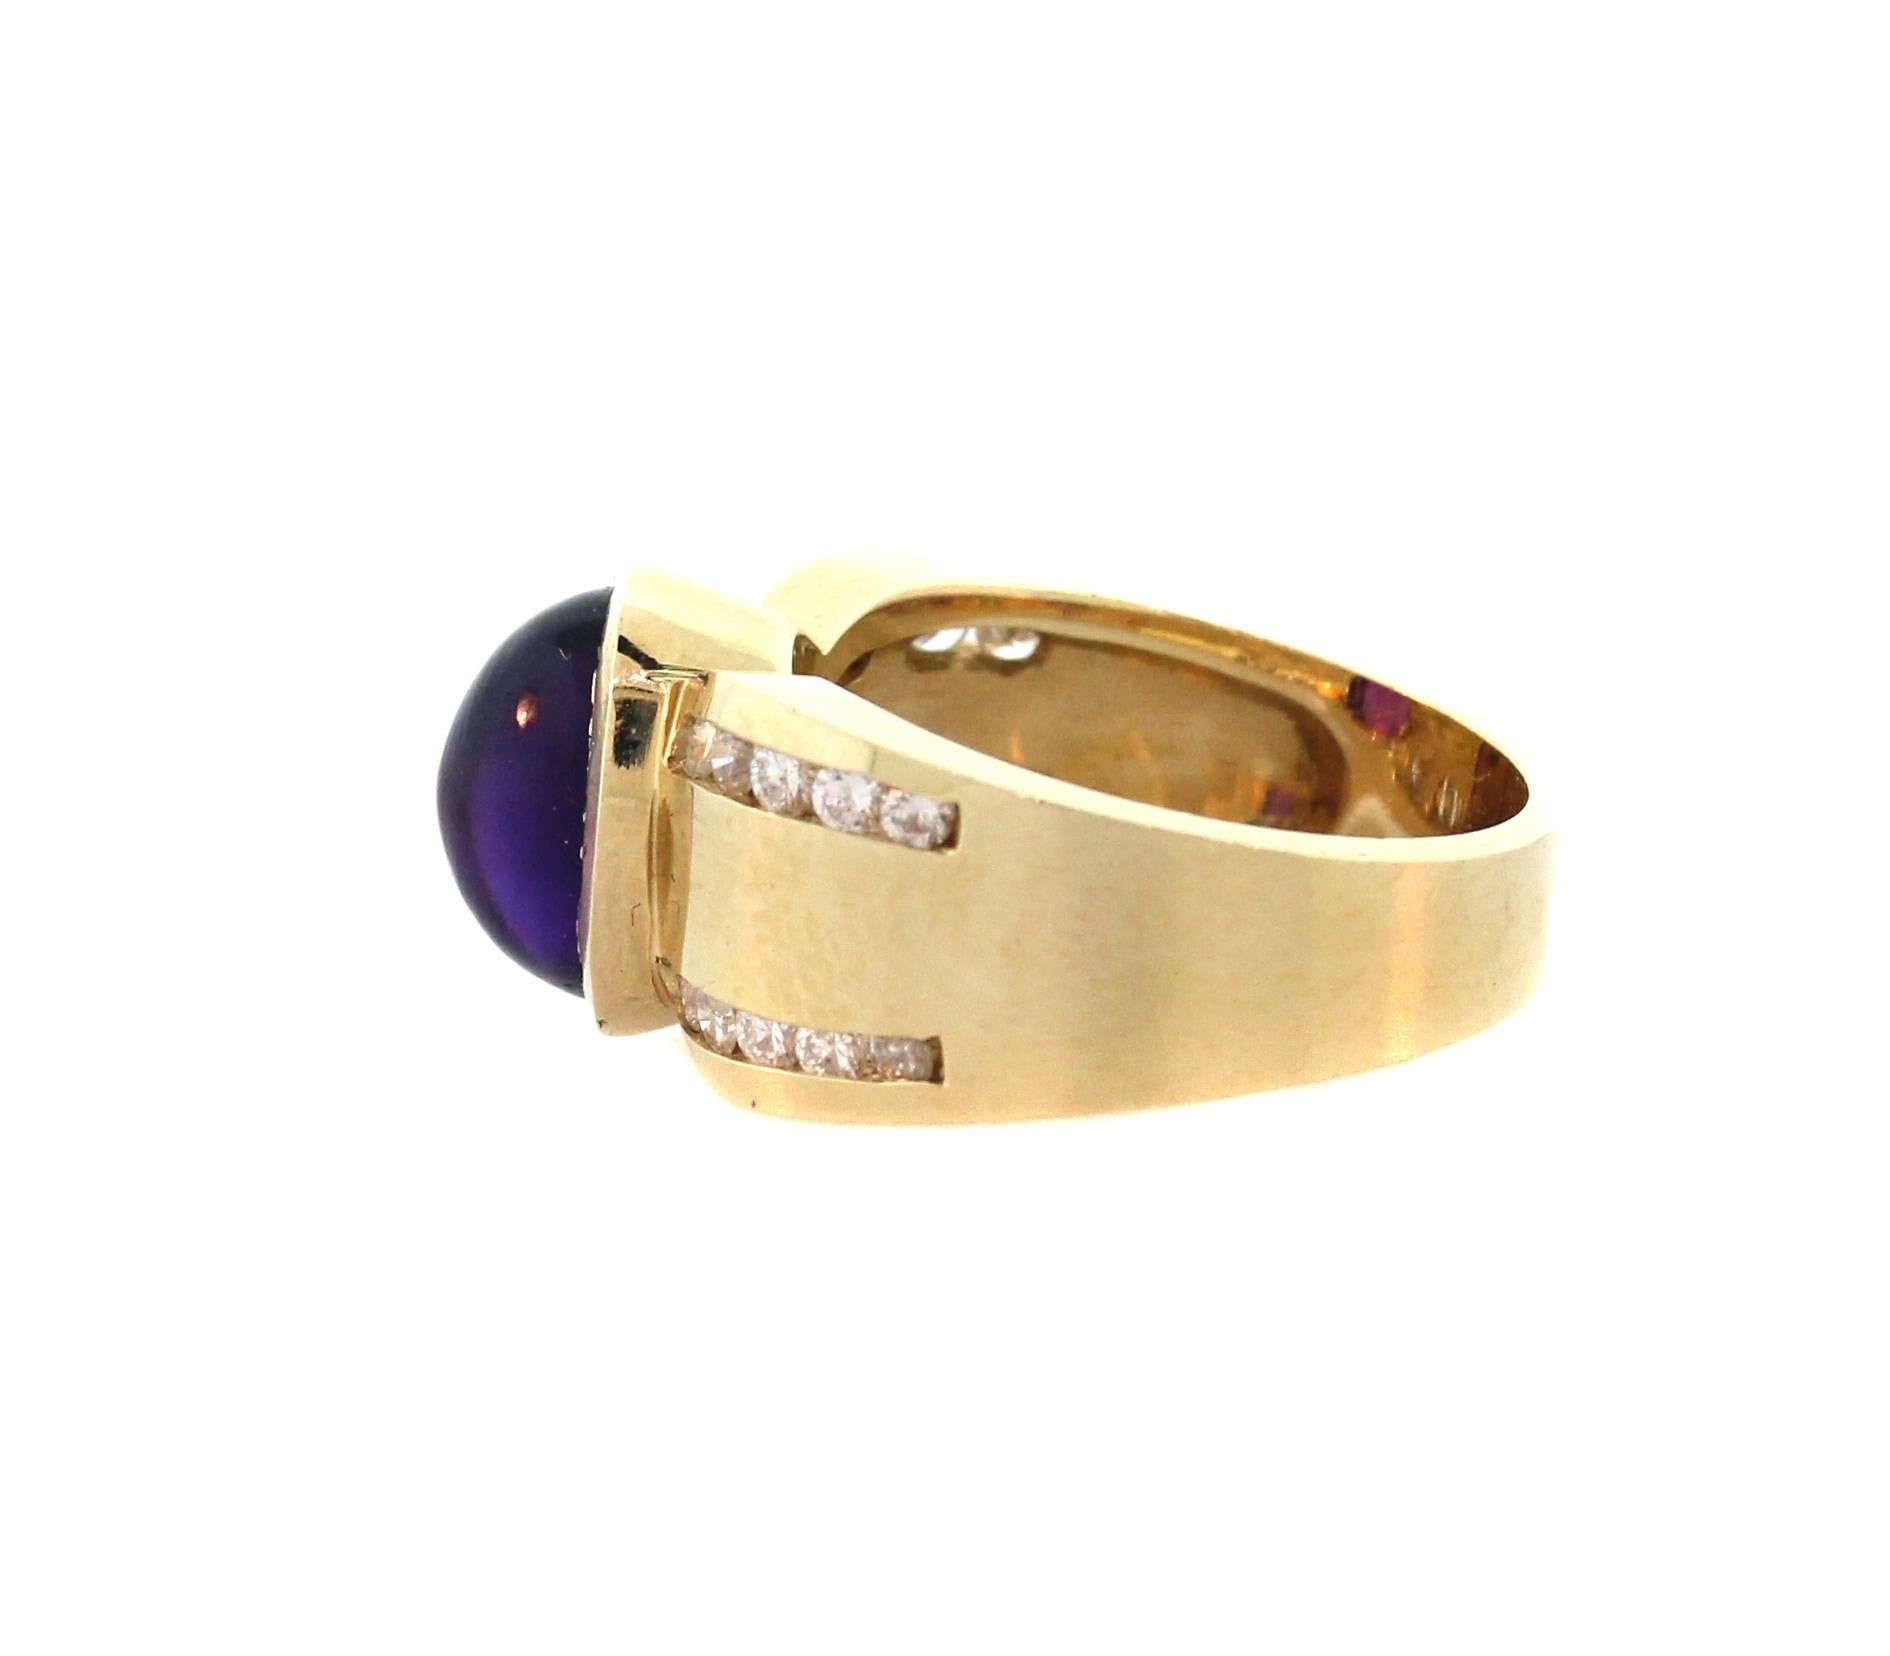 14K Yellow Gold Ring with Cabochon Amethyst Center and Diamonds

Center Cabochon cut Amethyst, apprx. 2.00ct.

0.39ct. Diamonds

0.45 inch band width.

Currently size 6.5 but can be sized.

Estate